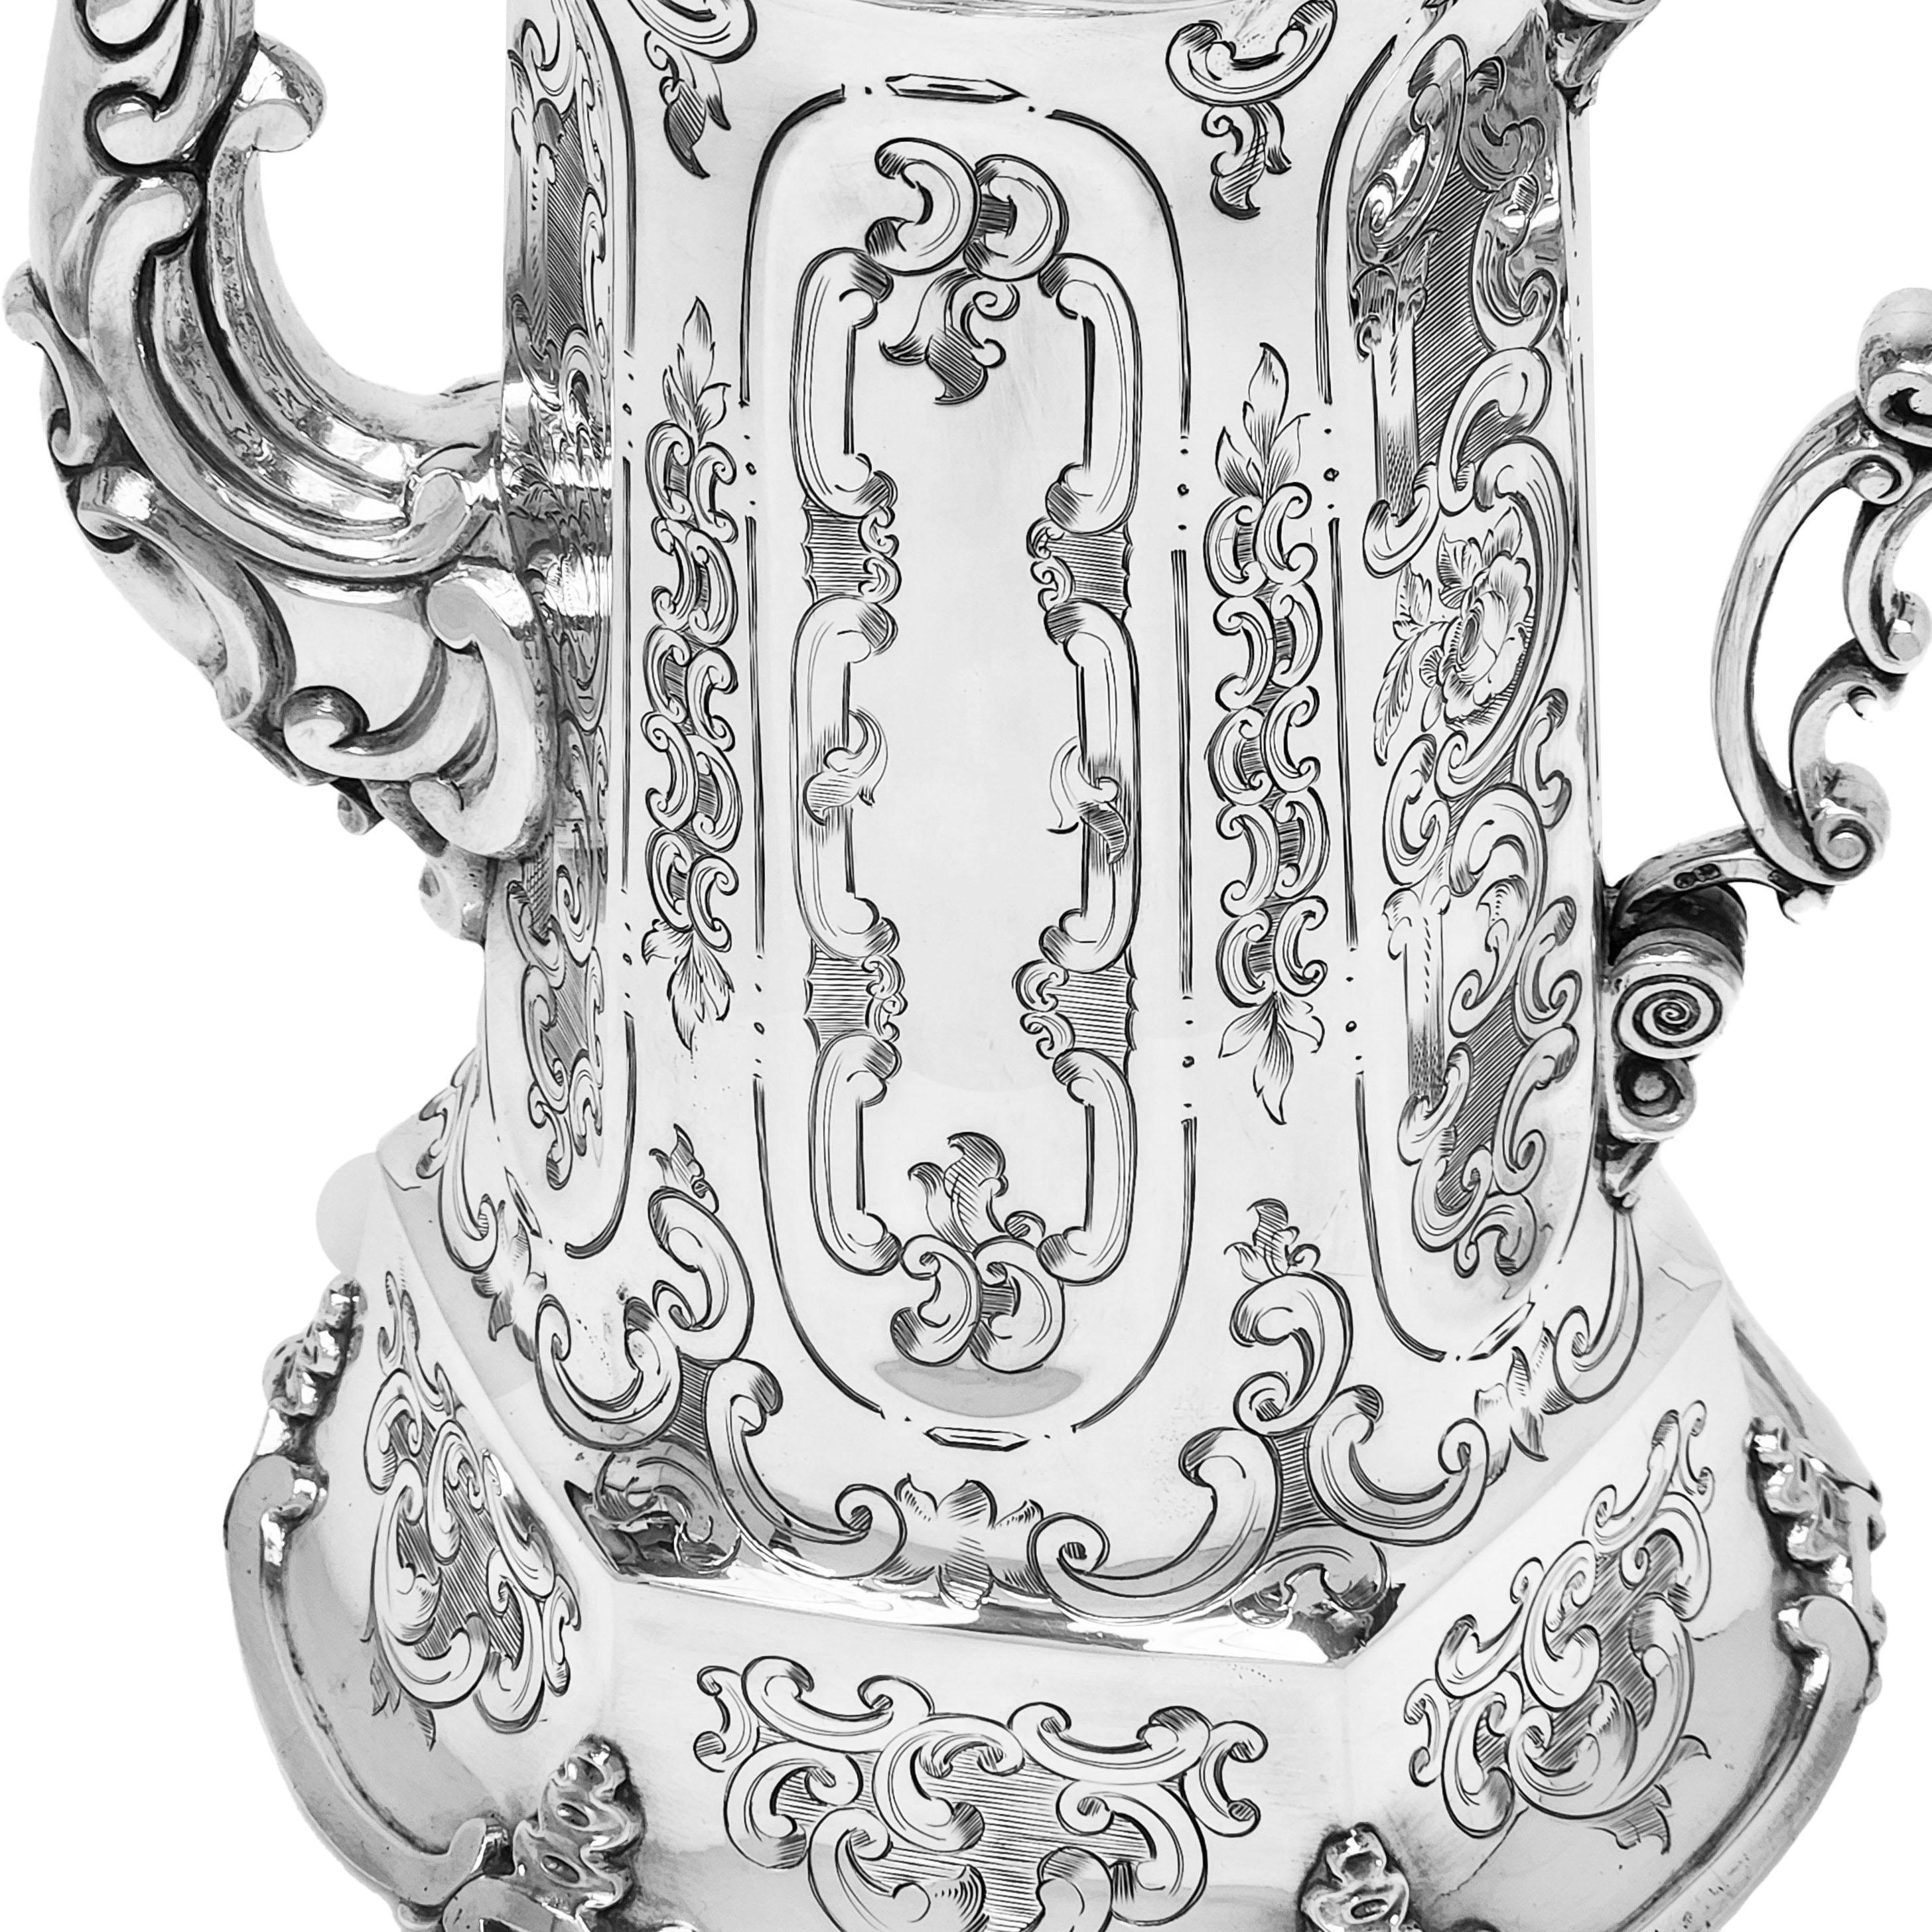 Antique Victorian 4 Piece Sterling Silver Tea & Coffee Set London England 1852 For Sale 1